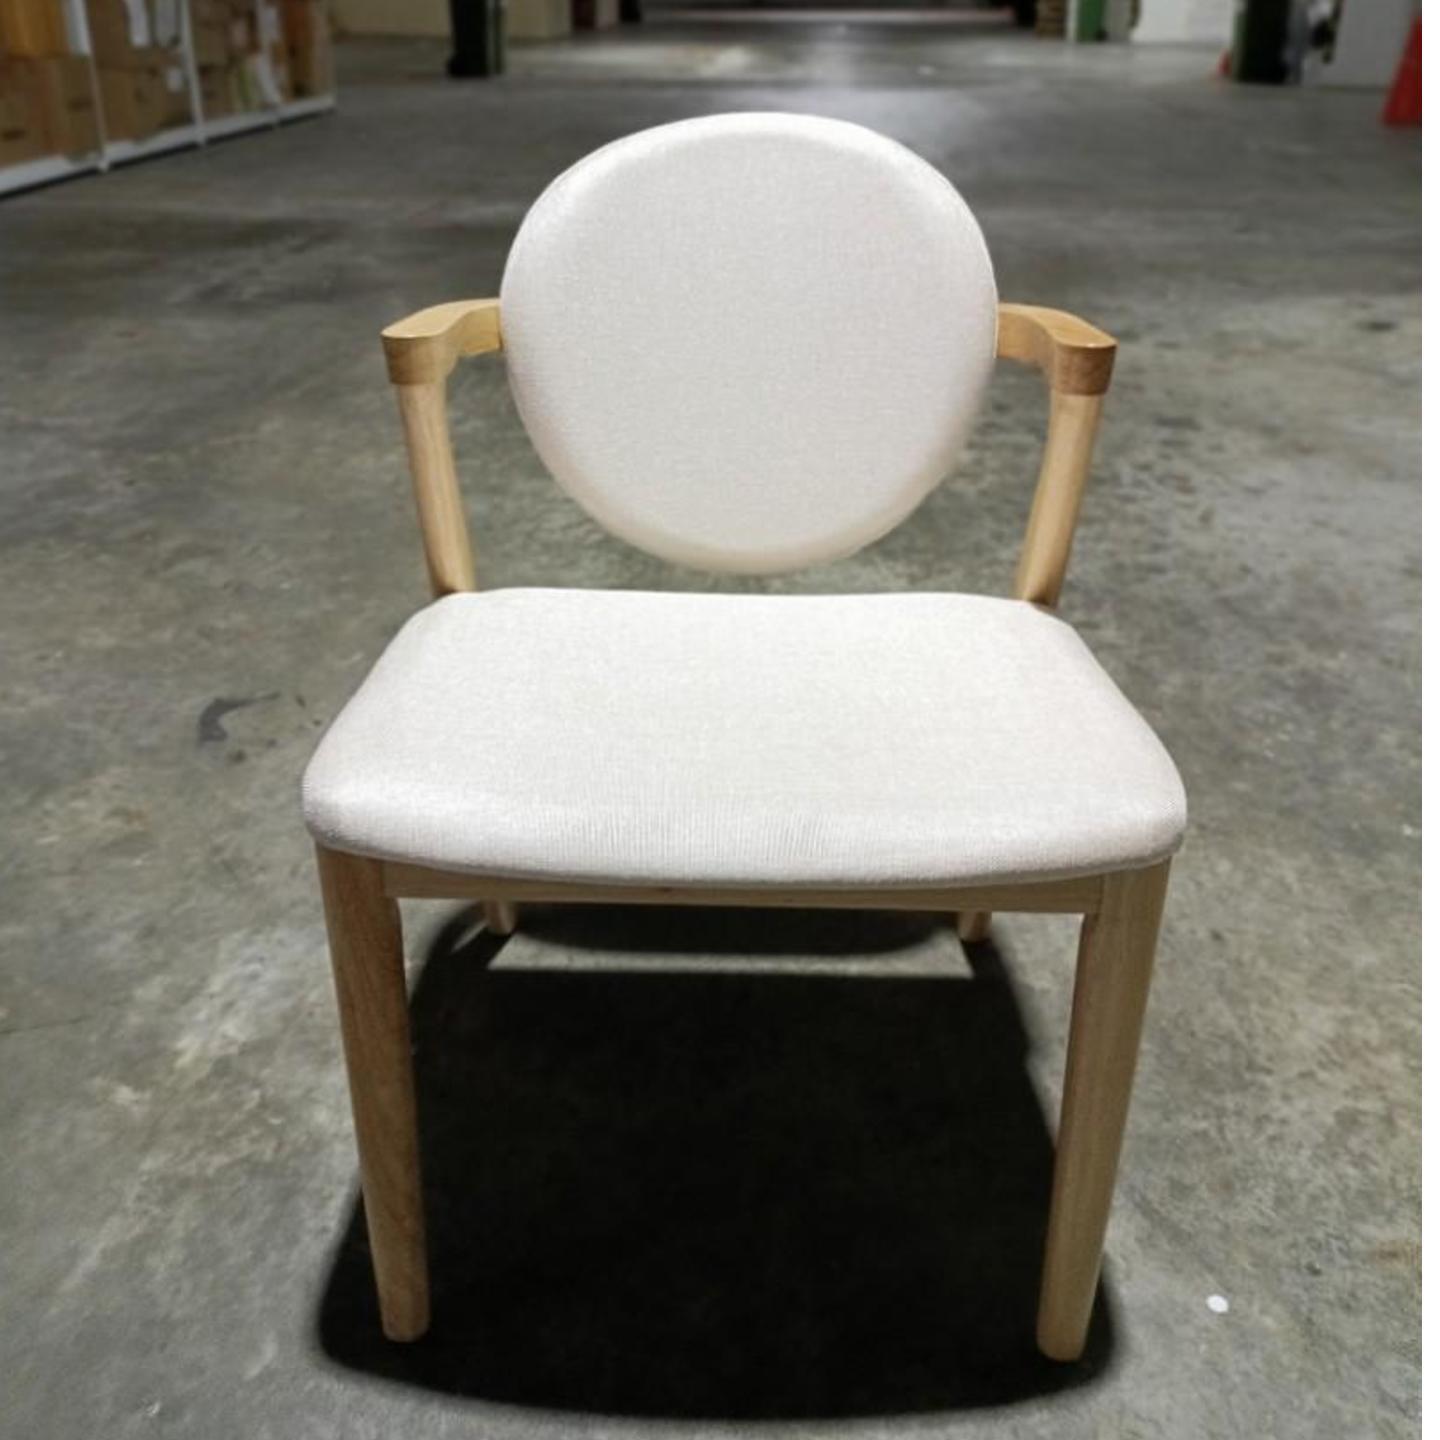 CHECKERS Dining Chair in Natural with Cream Cushion